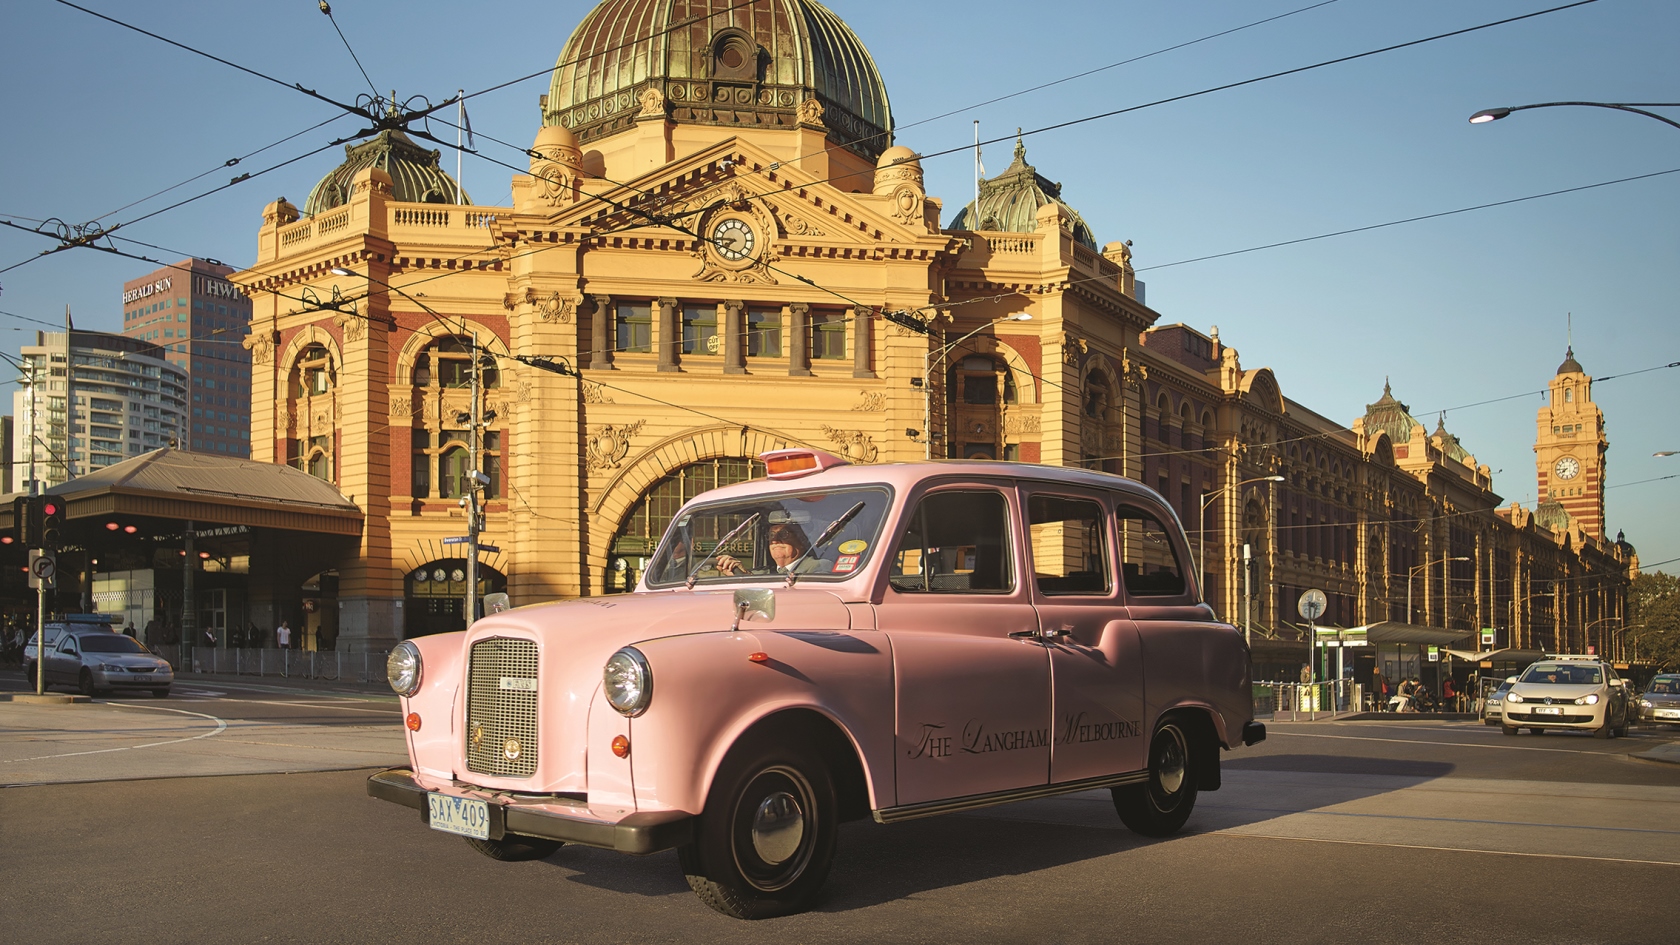 The pink taxi in front of the Langham, Melbourne